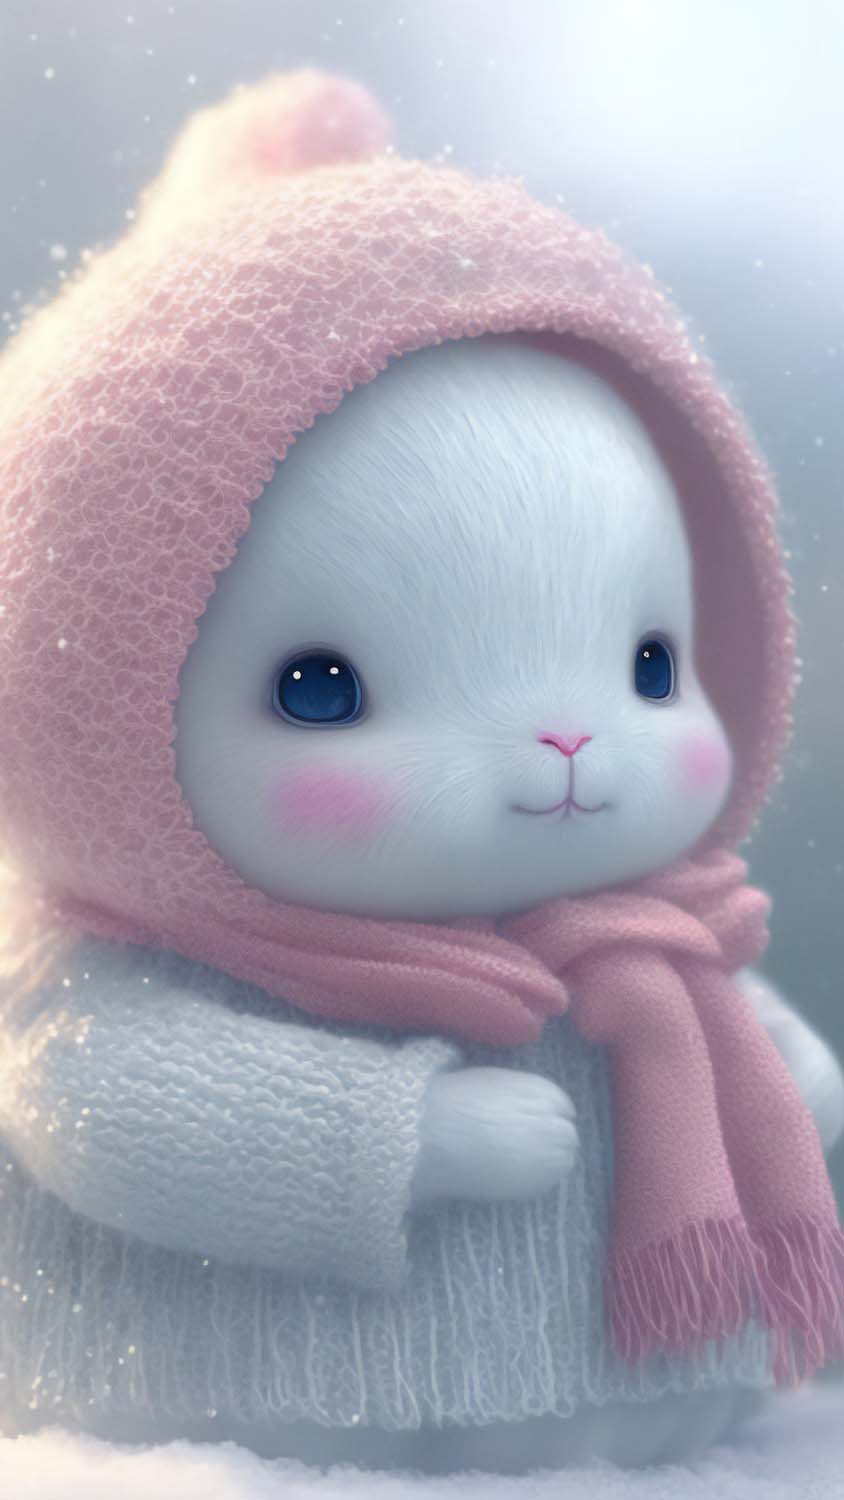 Cute Bunny IPhone Wallpaper HD - IPhone Wallpapers : iPhone Wallpapers